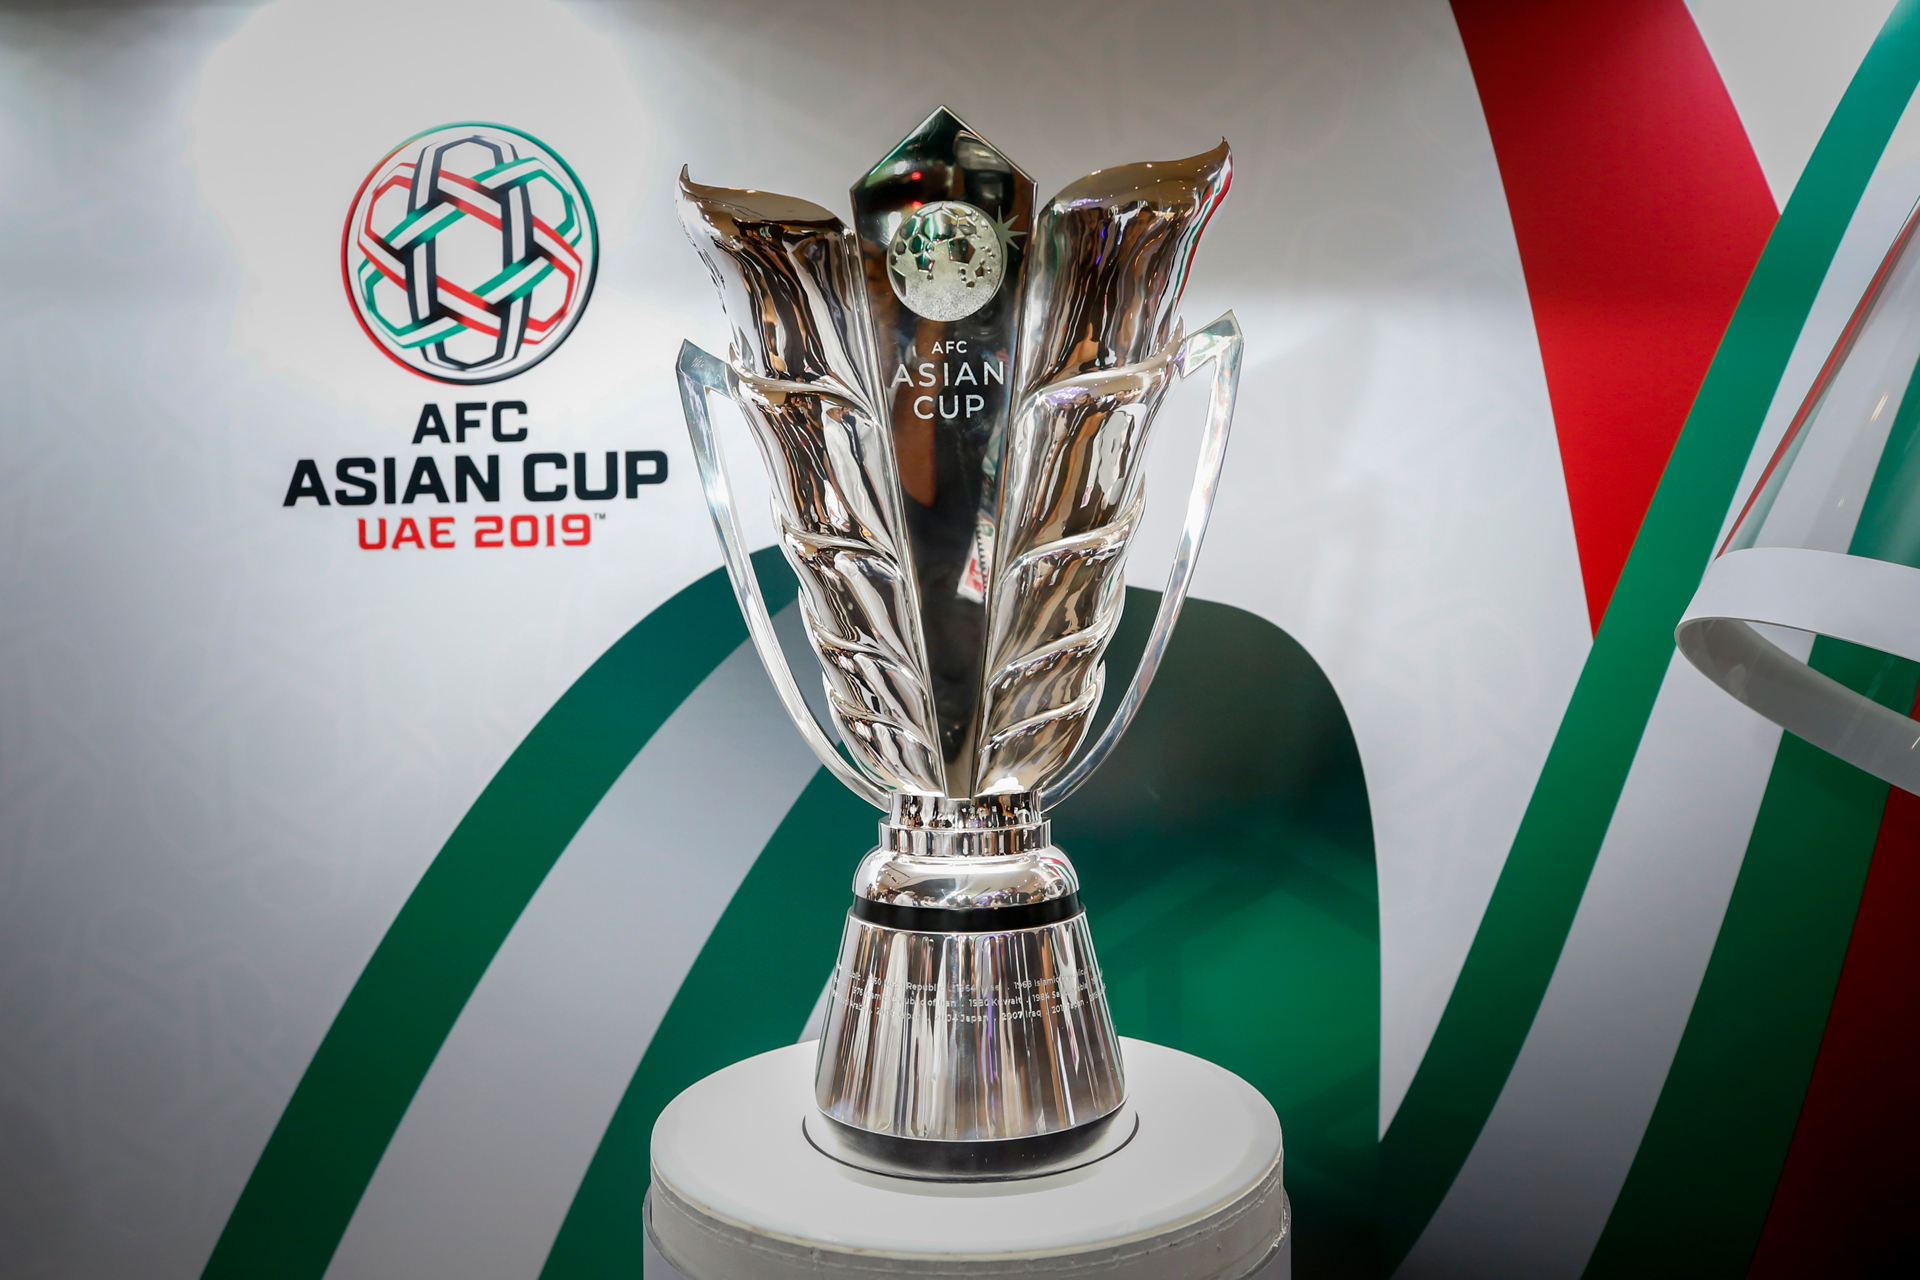 Your Essential Guide To The Afc Asian Cup 2019 | Time Out Abu Dhabi